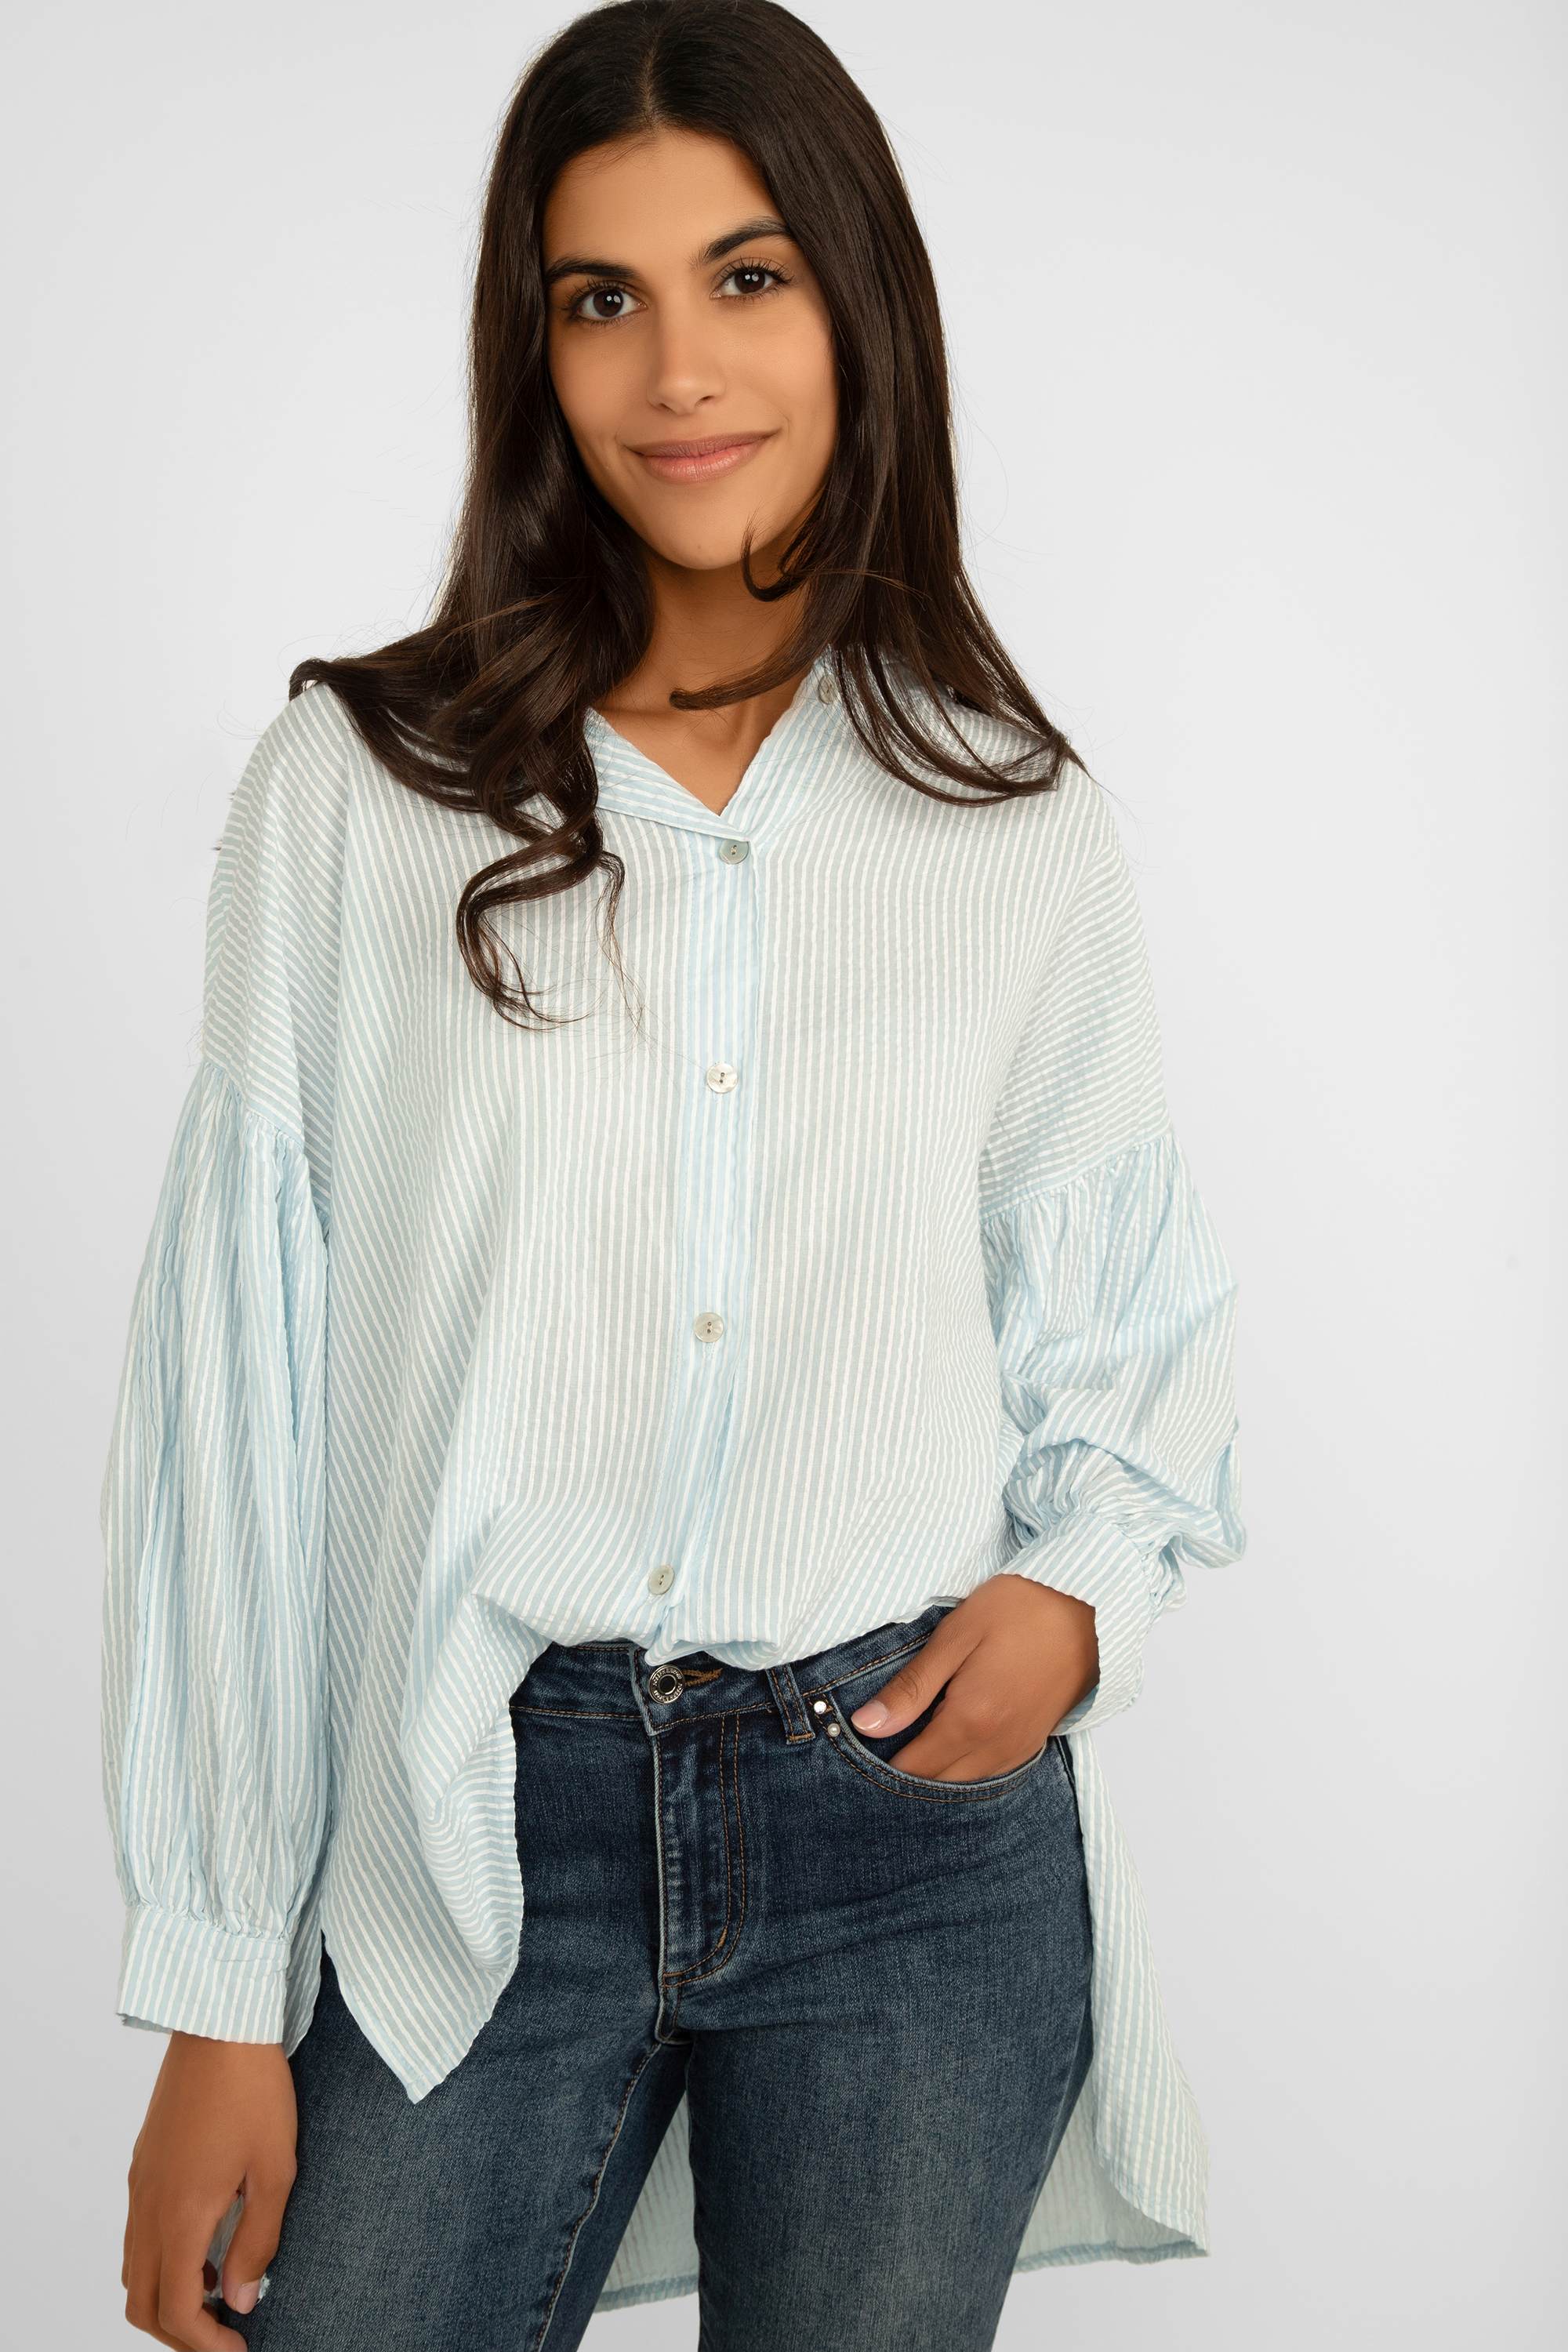 Elissia (JY3160) Women's Long Puff Sleeve Striped Button Up Collared Shirt in baby blue & white stripes